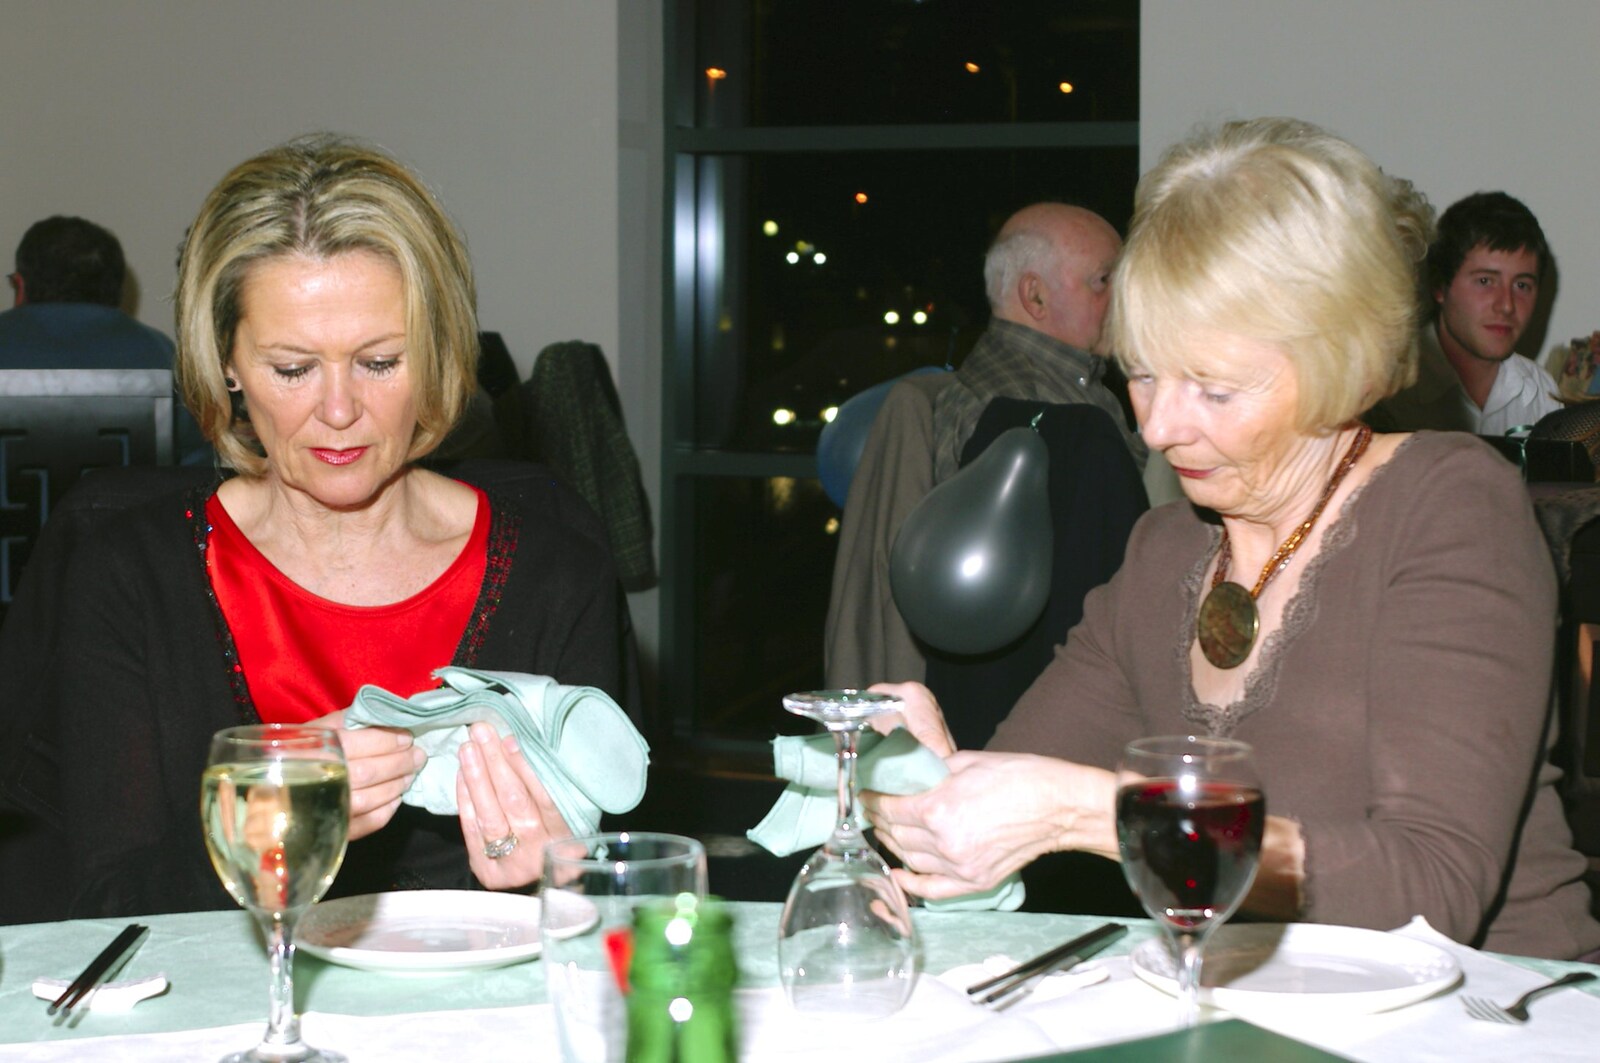 The Old Man's 70th Birthday, Pontefract, West Yorkshire - 29th January 2005: Folding up napkins in Eastern Court